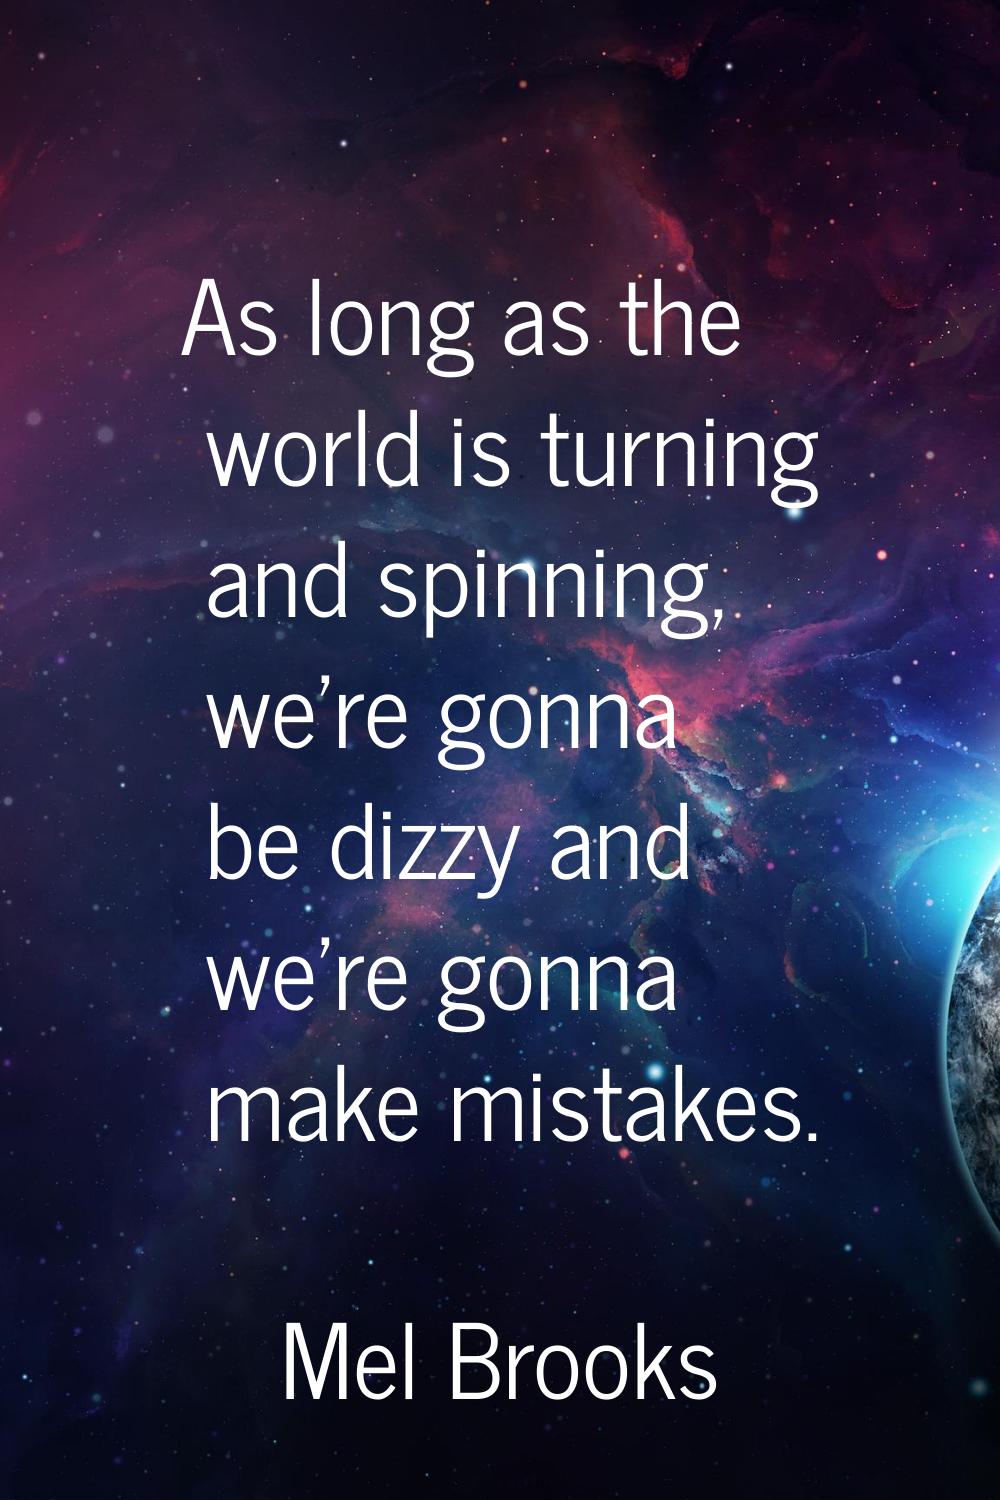 As long as the world is turning and spinning, we're gonna be dizzy and we're gonna make mistakes.